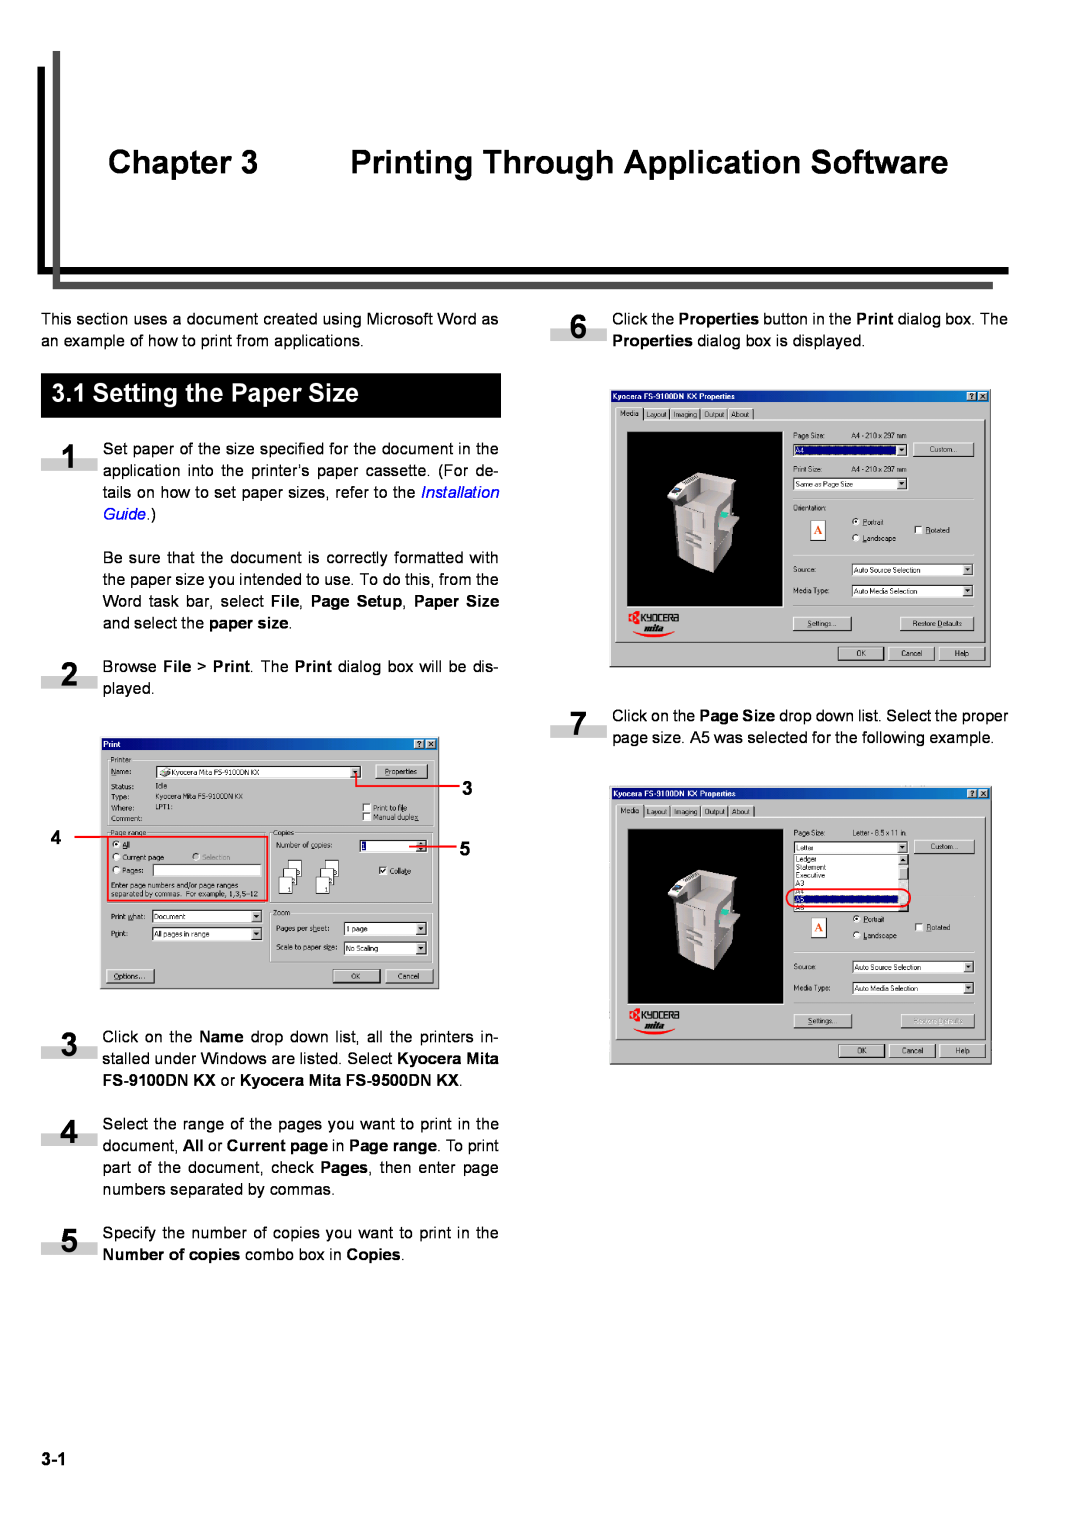 Kyocera S-9100DN manual Printing Through Application Software, Setting the Paper Size, Guide 